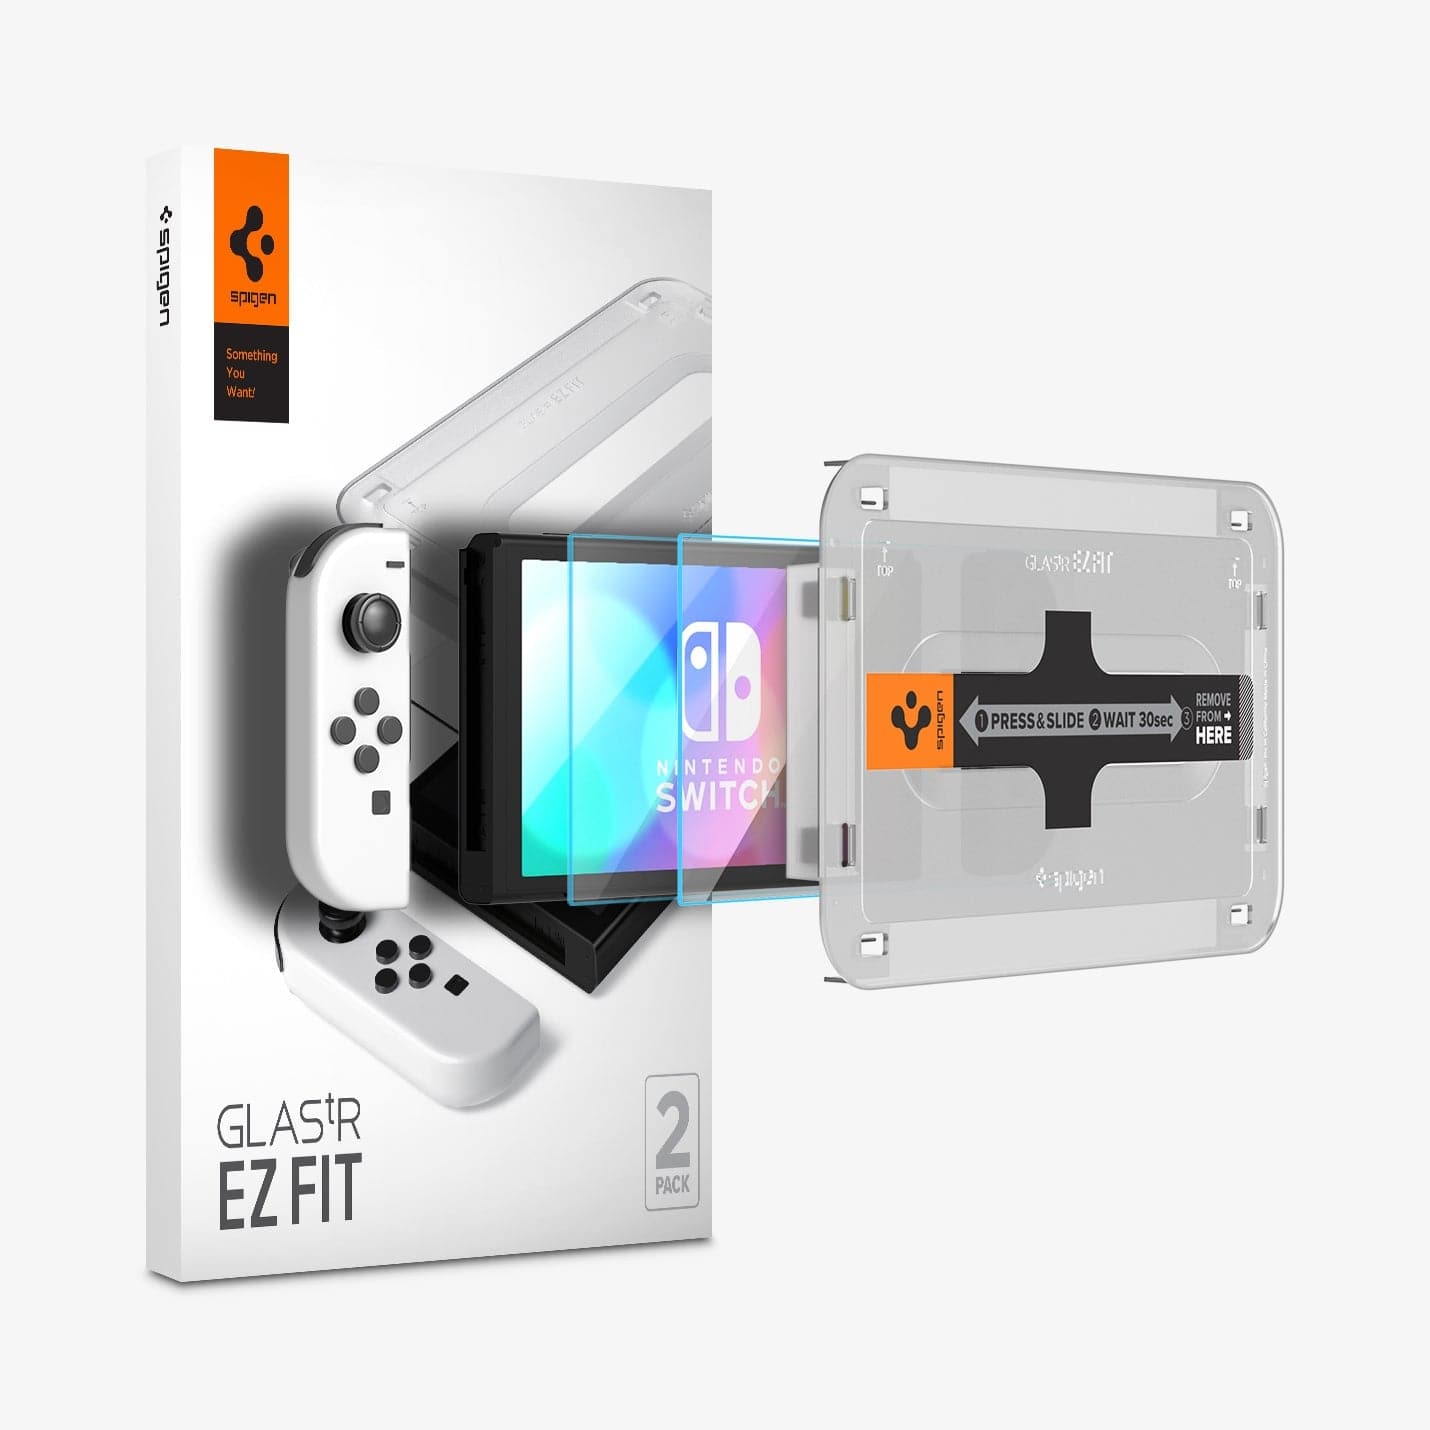 AGL03829 - Nintendo Switch OLED Screen Protector EZ Fit GLAS.tR showing the device, two screen protectors, ez fit tray and packaging